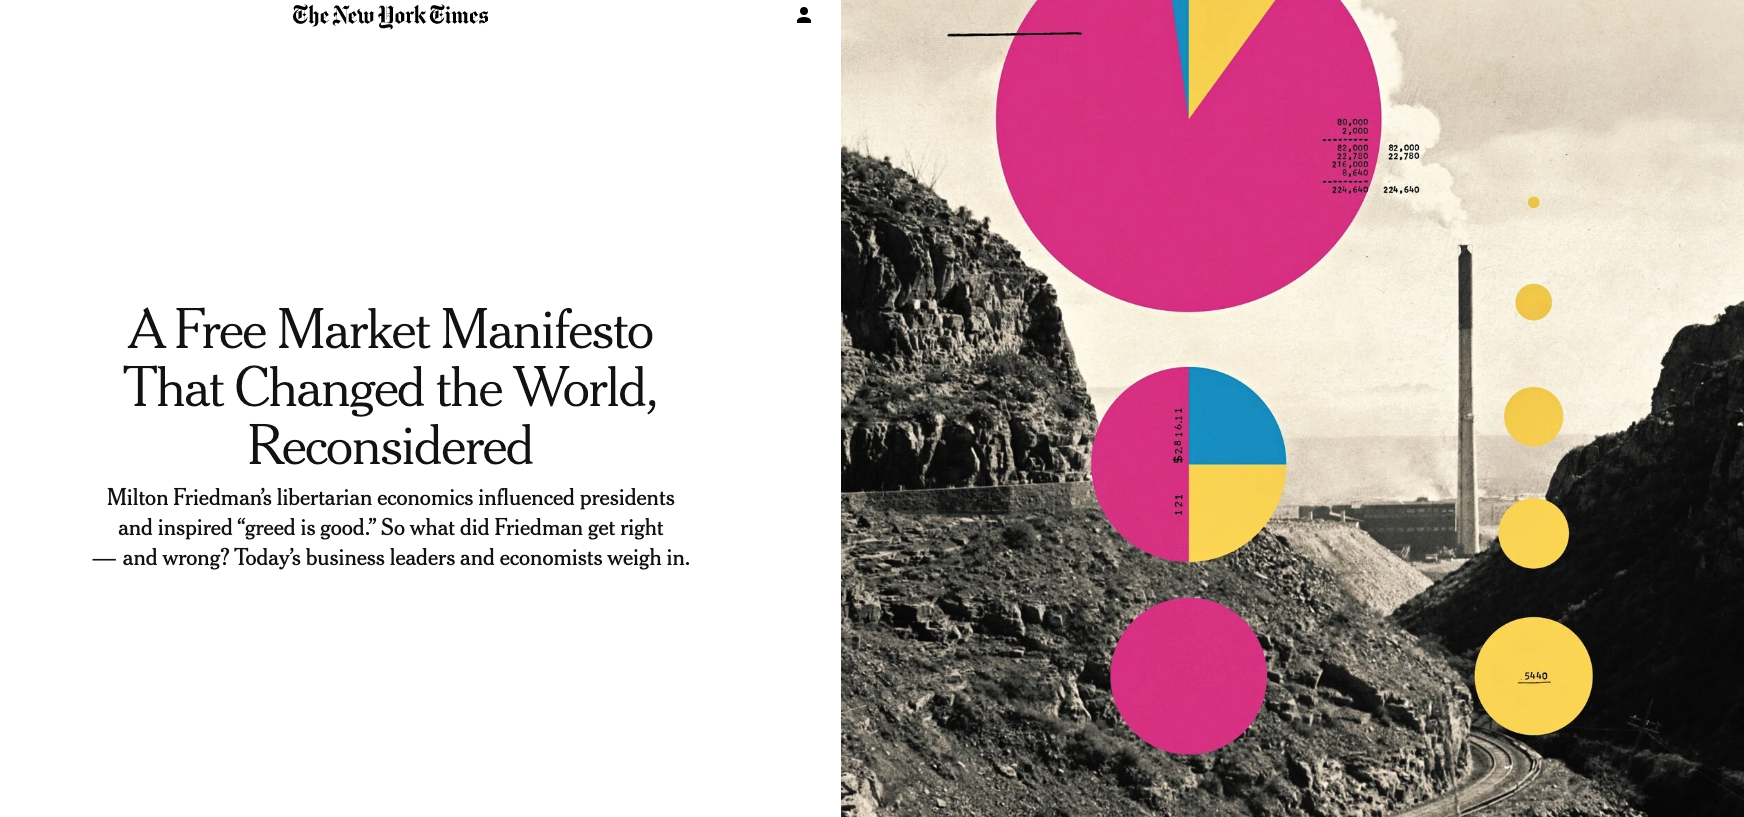 A Free Market Manifesto That Changed the World, Reconsidered - New York Times